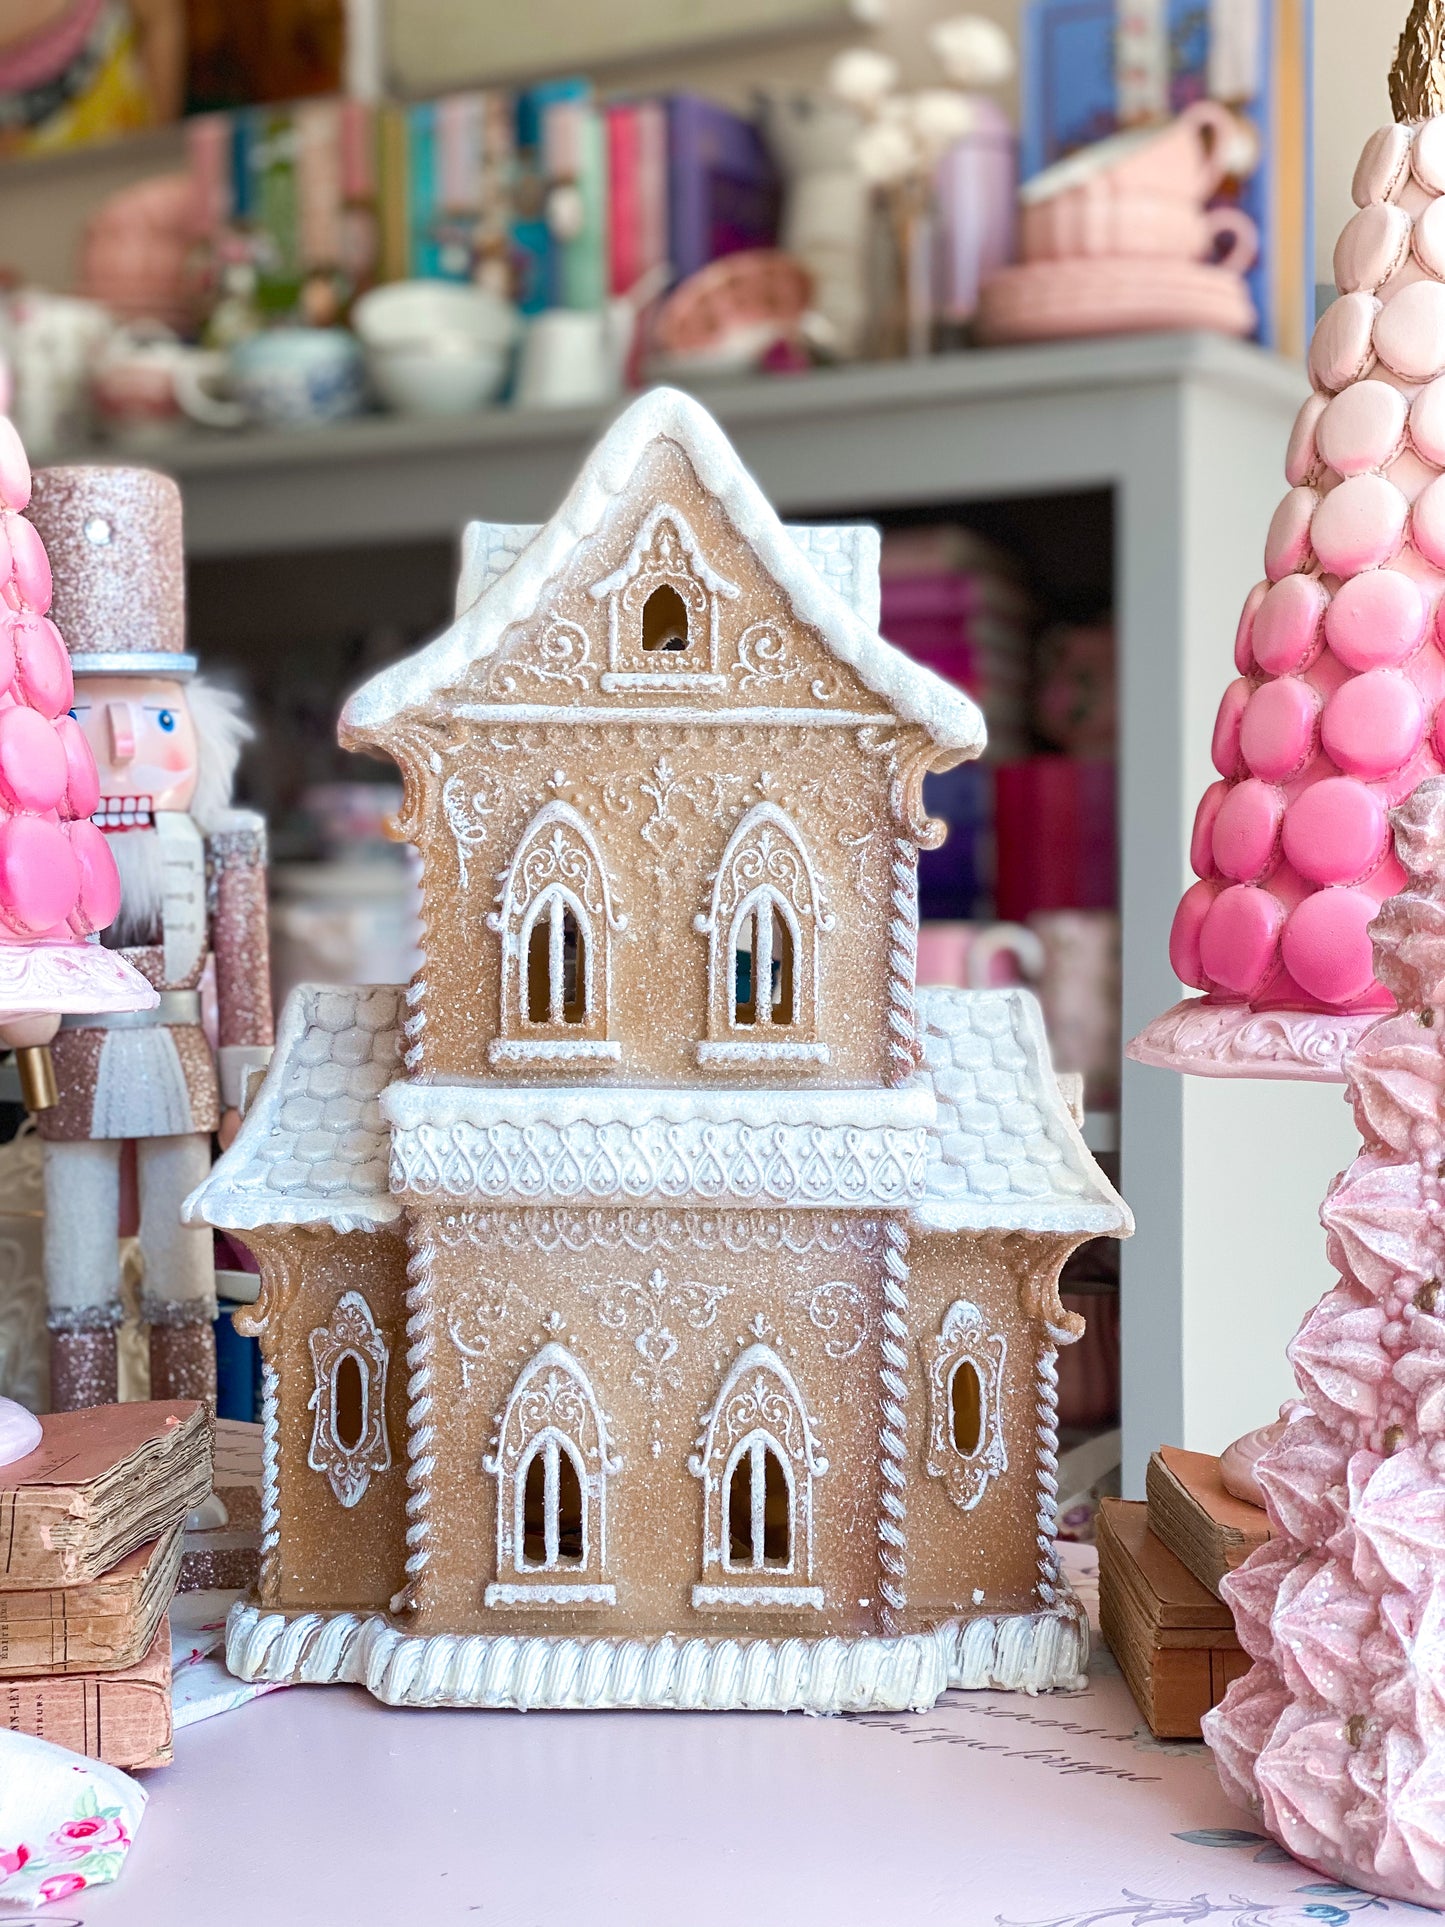 Neutral Gingerbread Mansion with ornate icing design